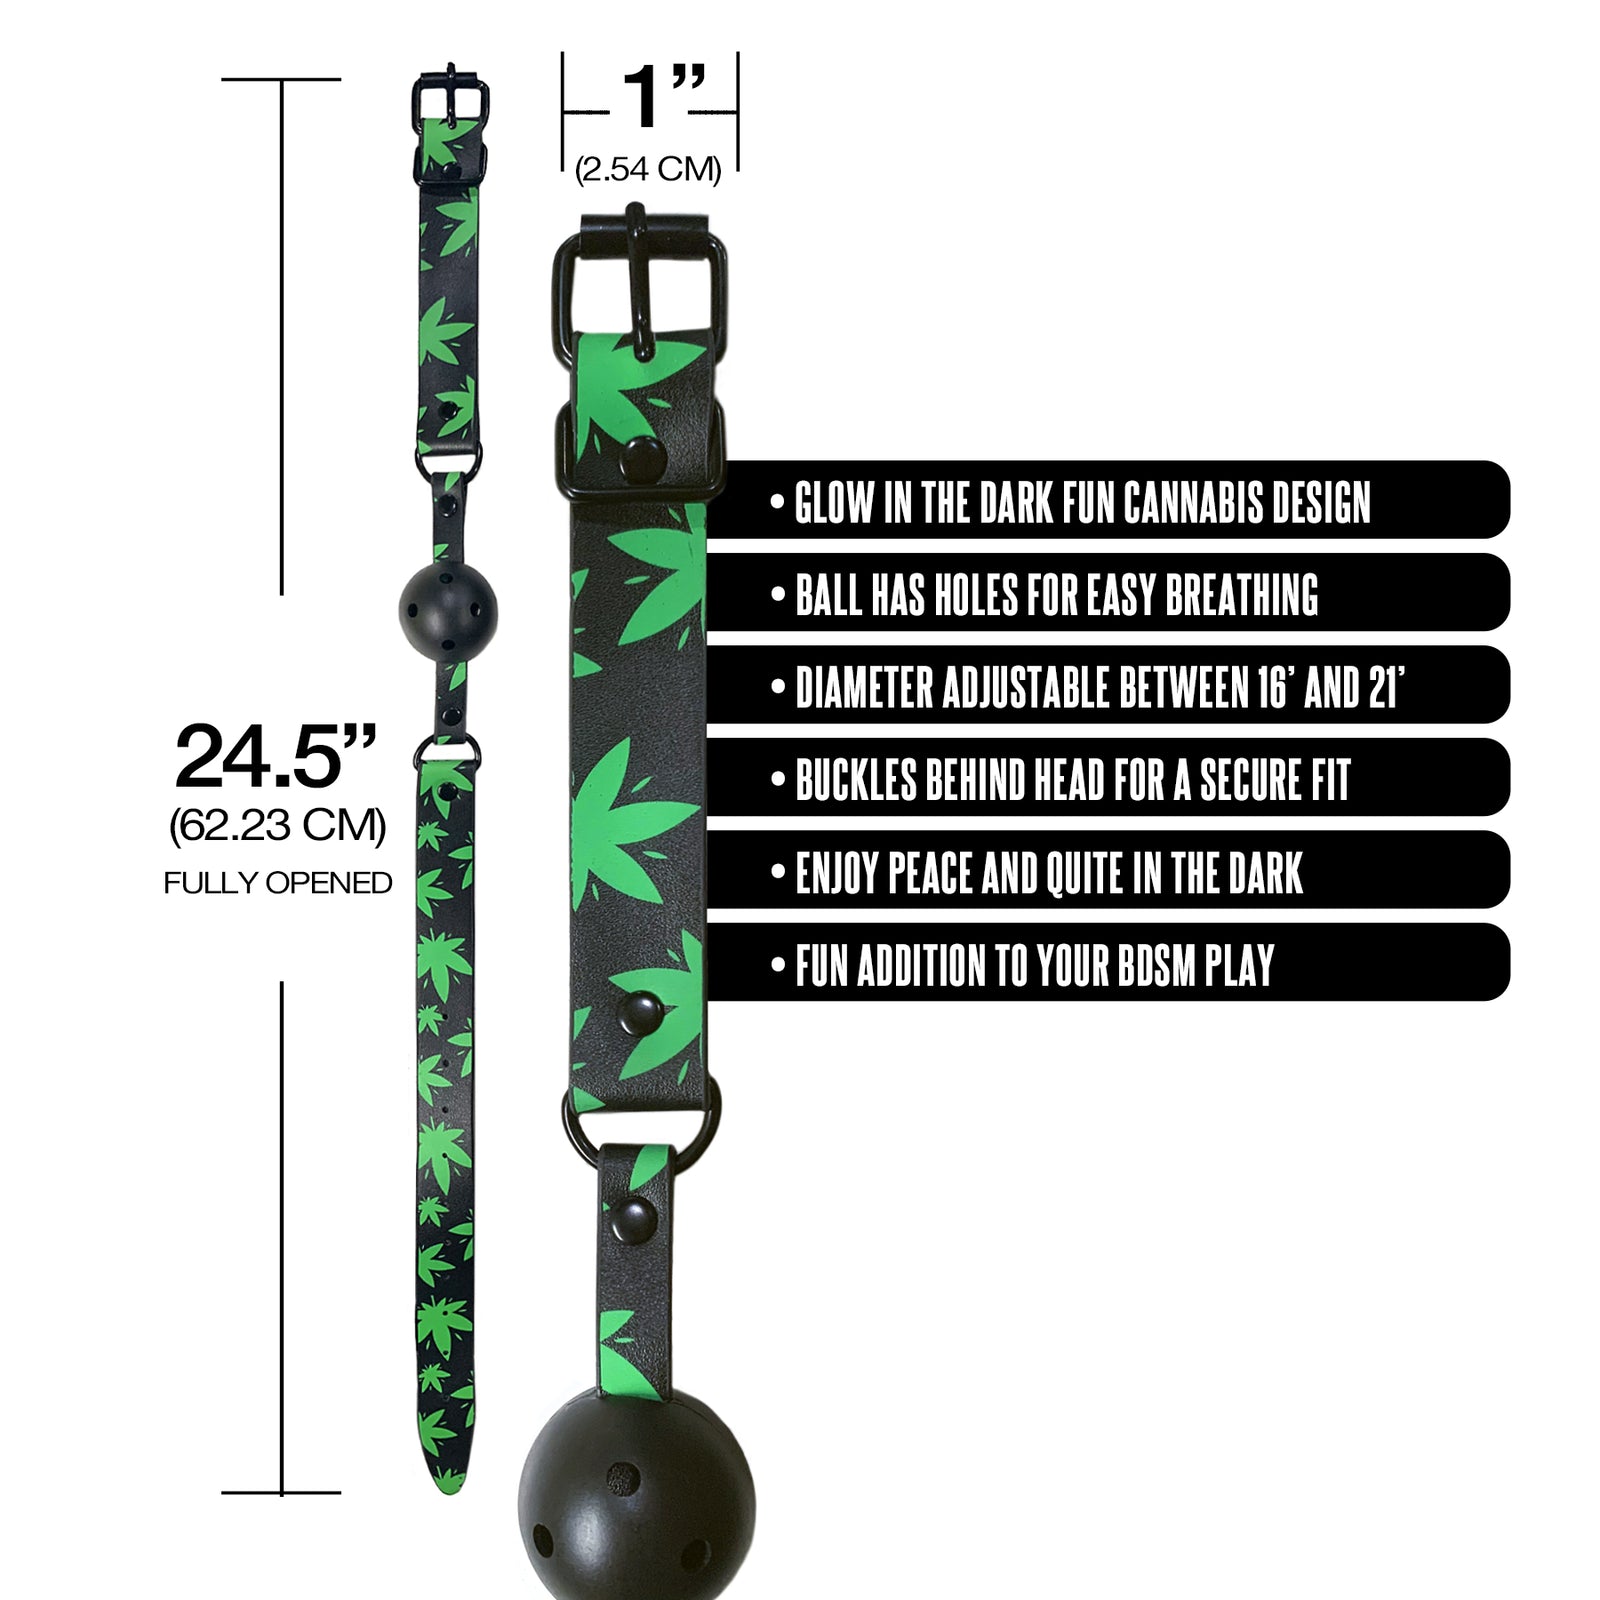 Stoner Vibes, Chronic Collection, Glow In The Dark, Breathable Ball Gag - THES